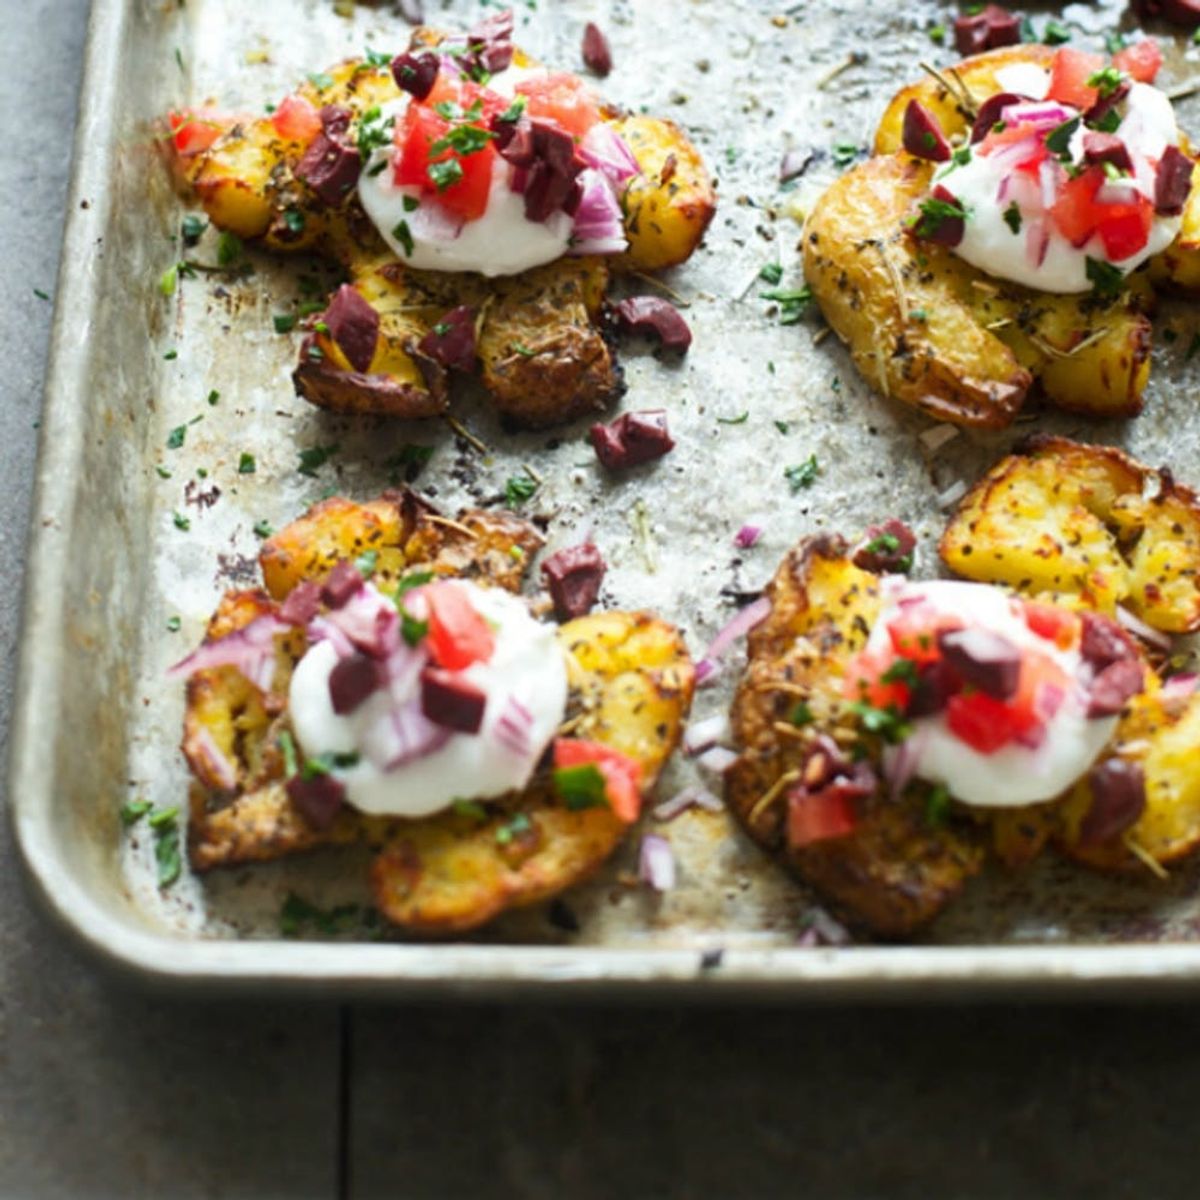 13 Smashed Potato Recipes That Make a *Perf* Spring BBQ Side